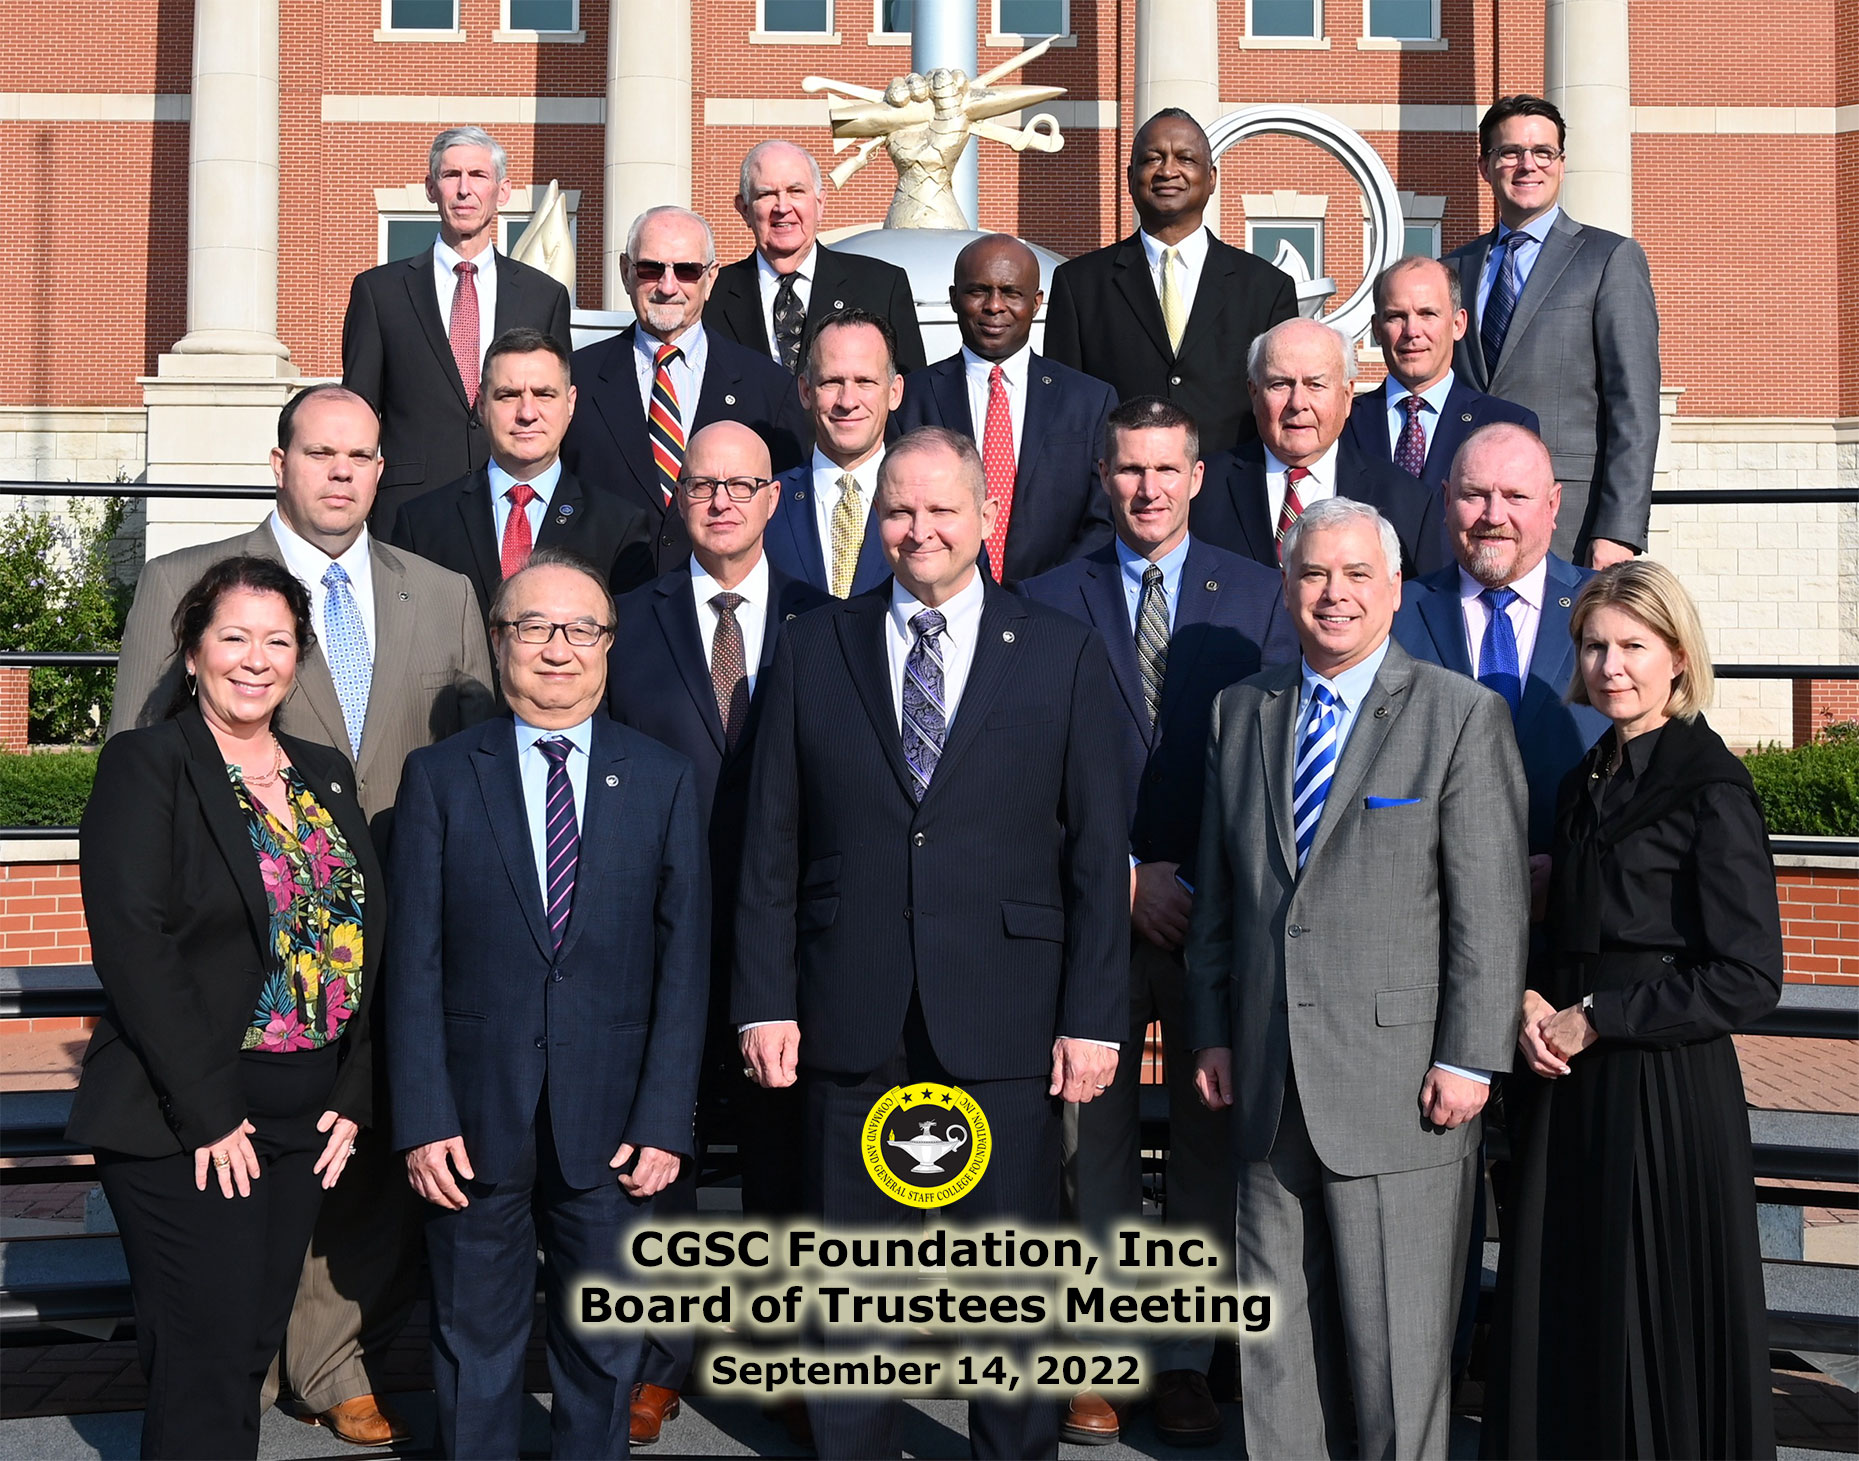 group photo of the CGSC Foundation board of trustees who attended the board meeting on Sept. 14, 2022. Over the photo is the Foundation logo and the date.